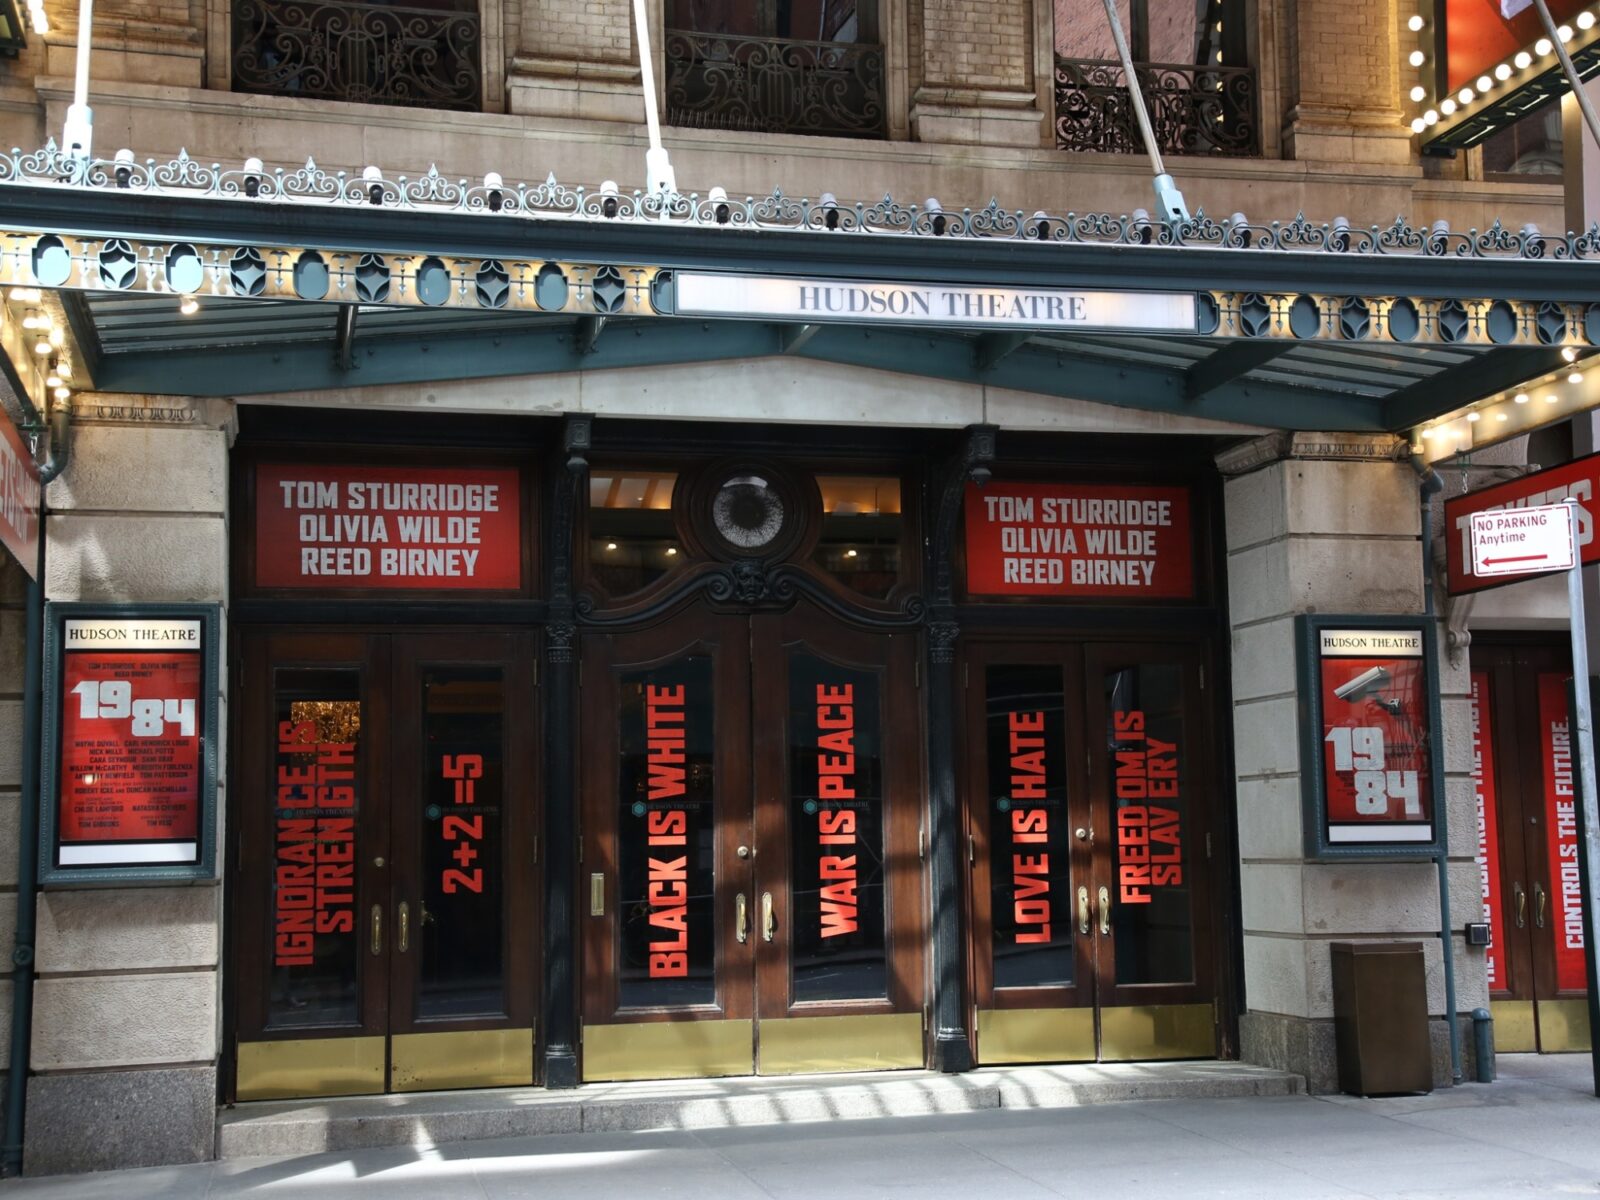 1984 Discount Broadway Tickets Including Discount Code and Ticket Lottery